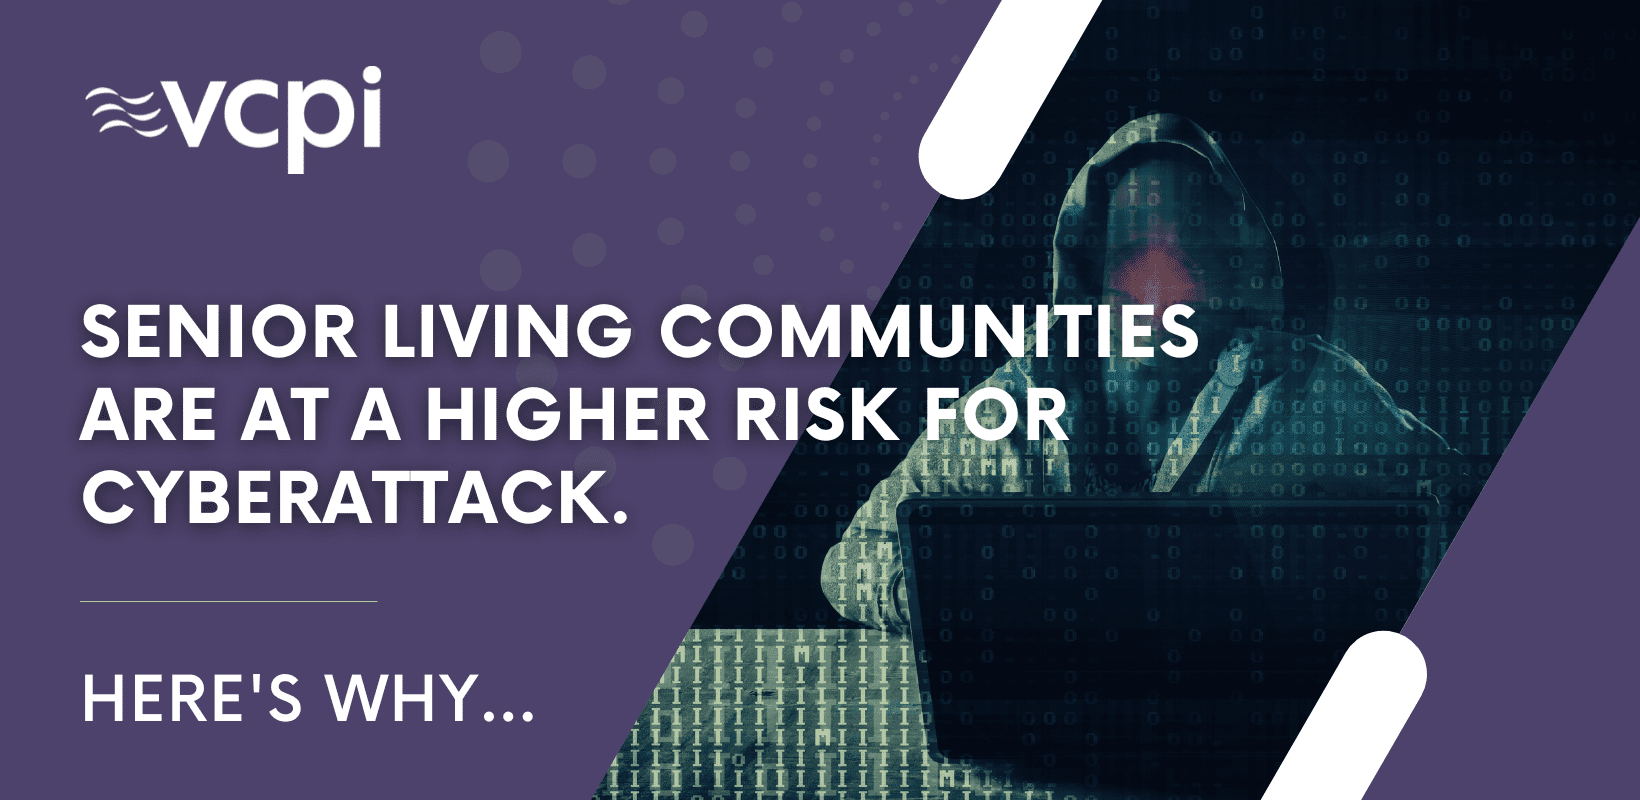 Senior living communities are at a higher risk for cyberattack. Cybercriminals specifically target the healthcare industry, including nursing homes and senior living facilities, due to the sensitive and valuable data they possess and their inadequate network security measures.